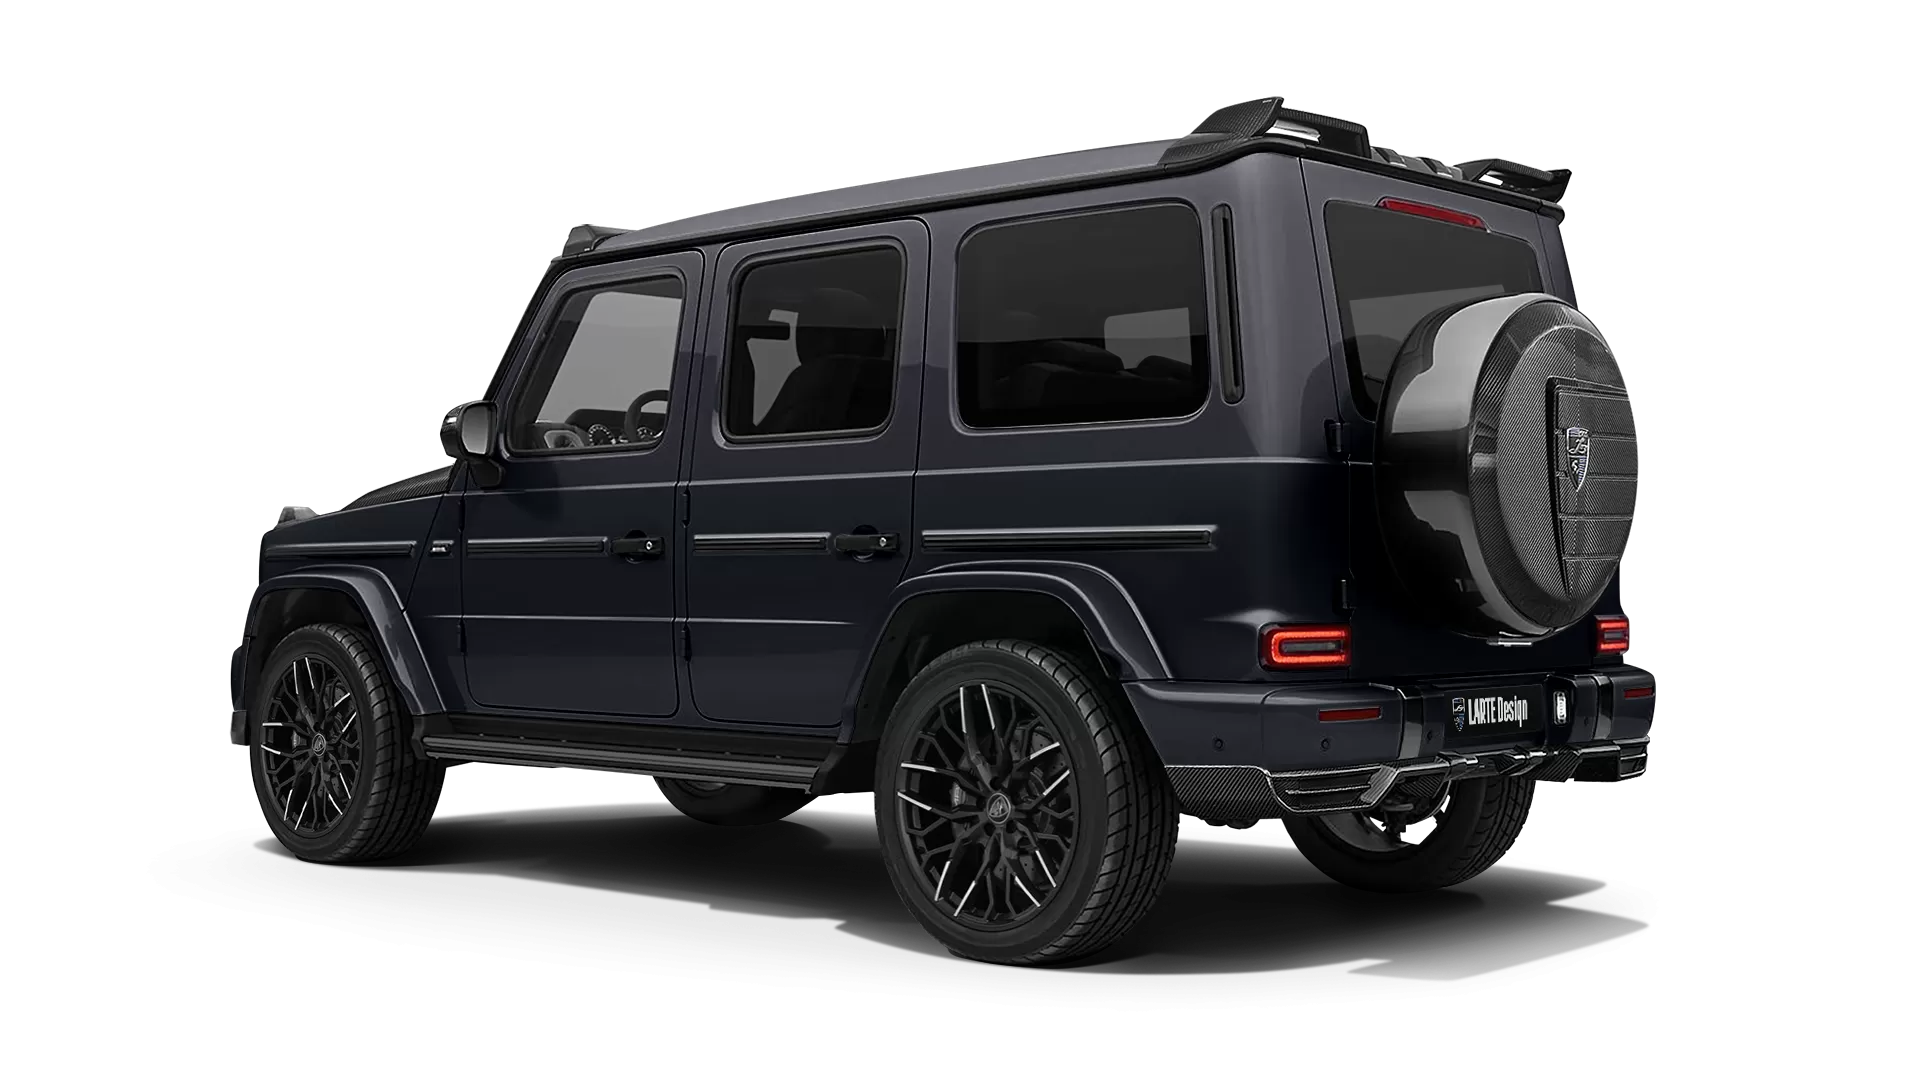 Mercedes G class W463 with carbon body kit: back view shown in Obsidian Black